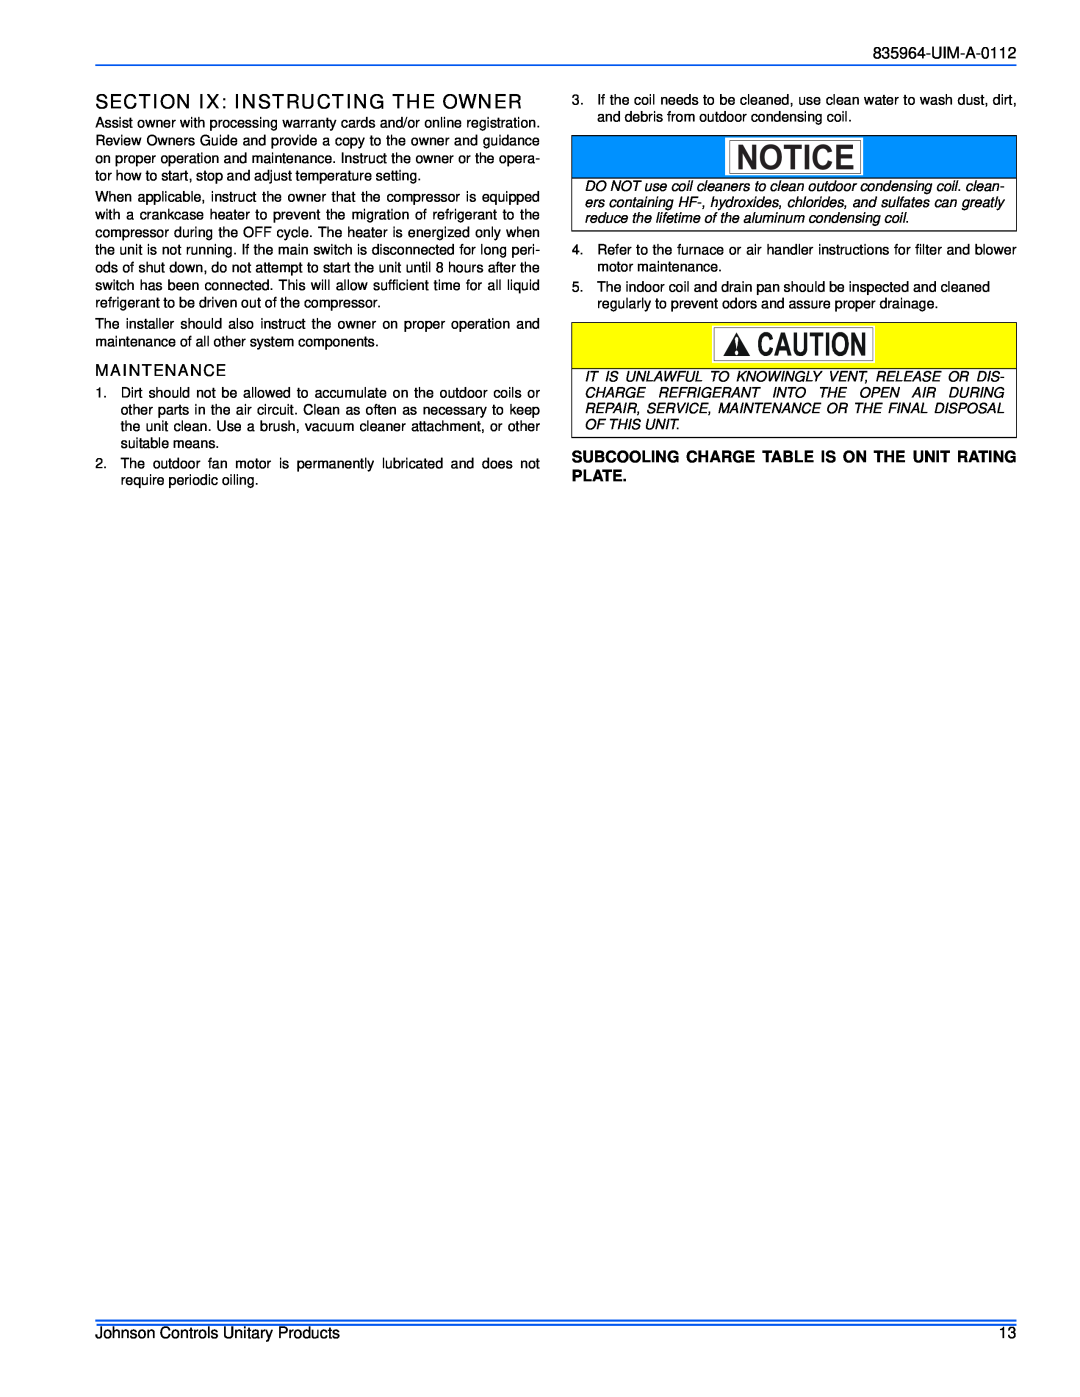 Johnson Controls R-410A Section Ix Instructing The Owner, Maintenance, UIM-A-0112, Johnson Controls Unitary Products 